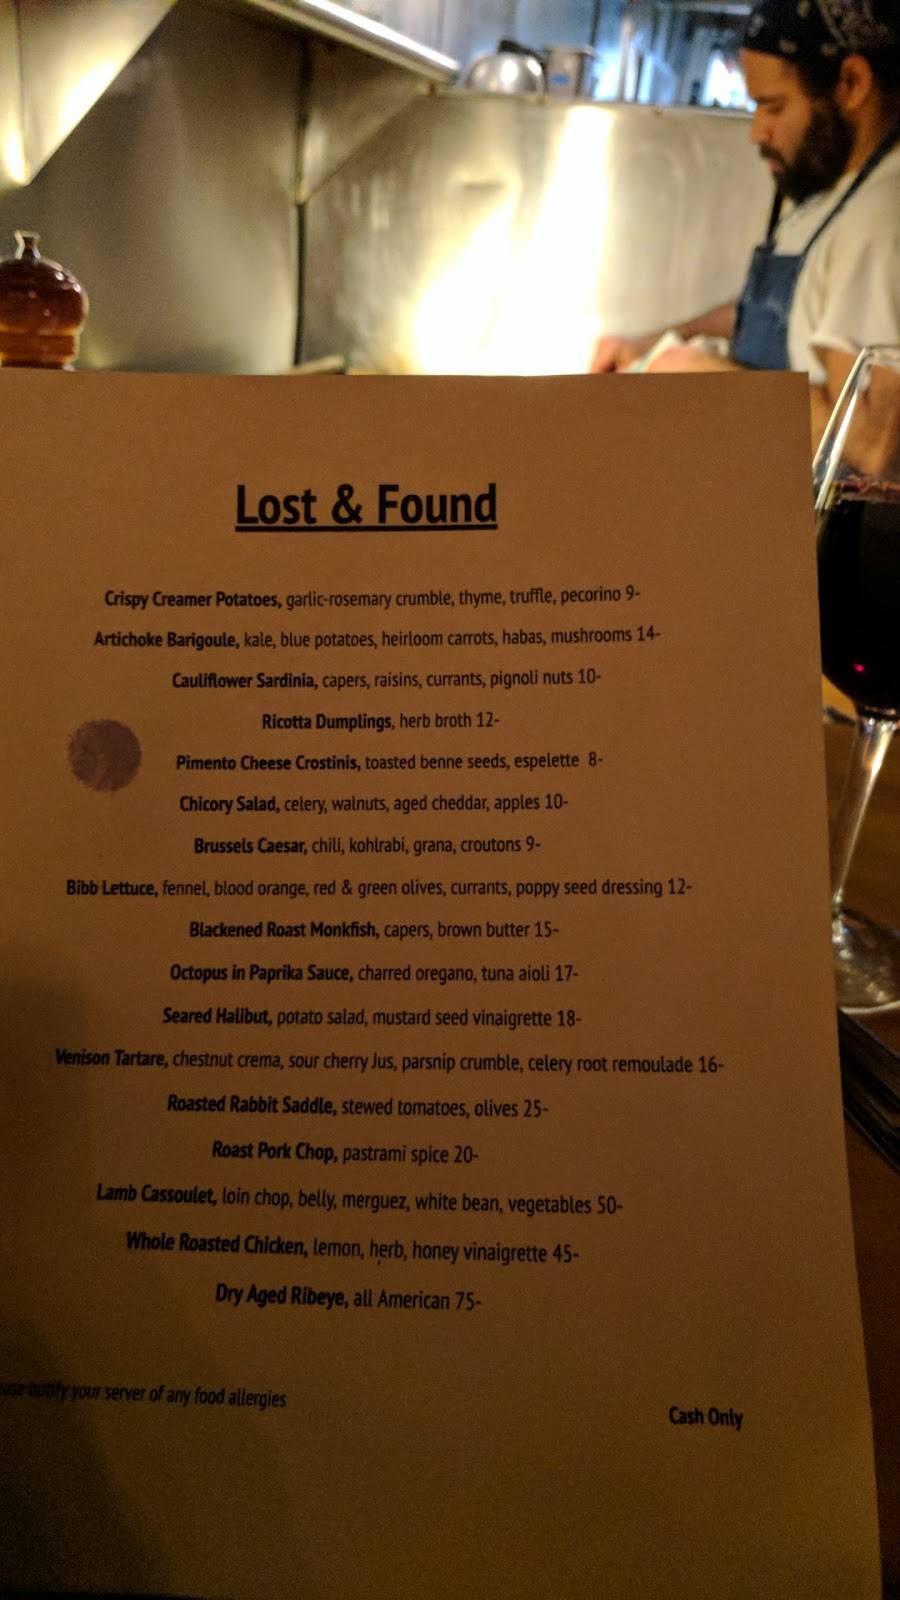 Lost And Found | 951 W Beech St, Long Beach, NY 11561 | Phone: (516) 442-2606